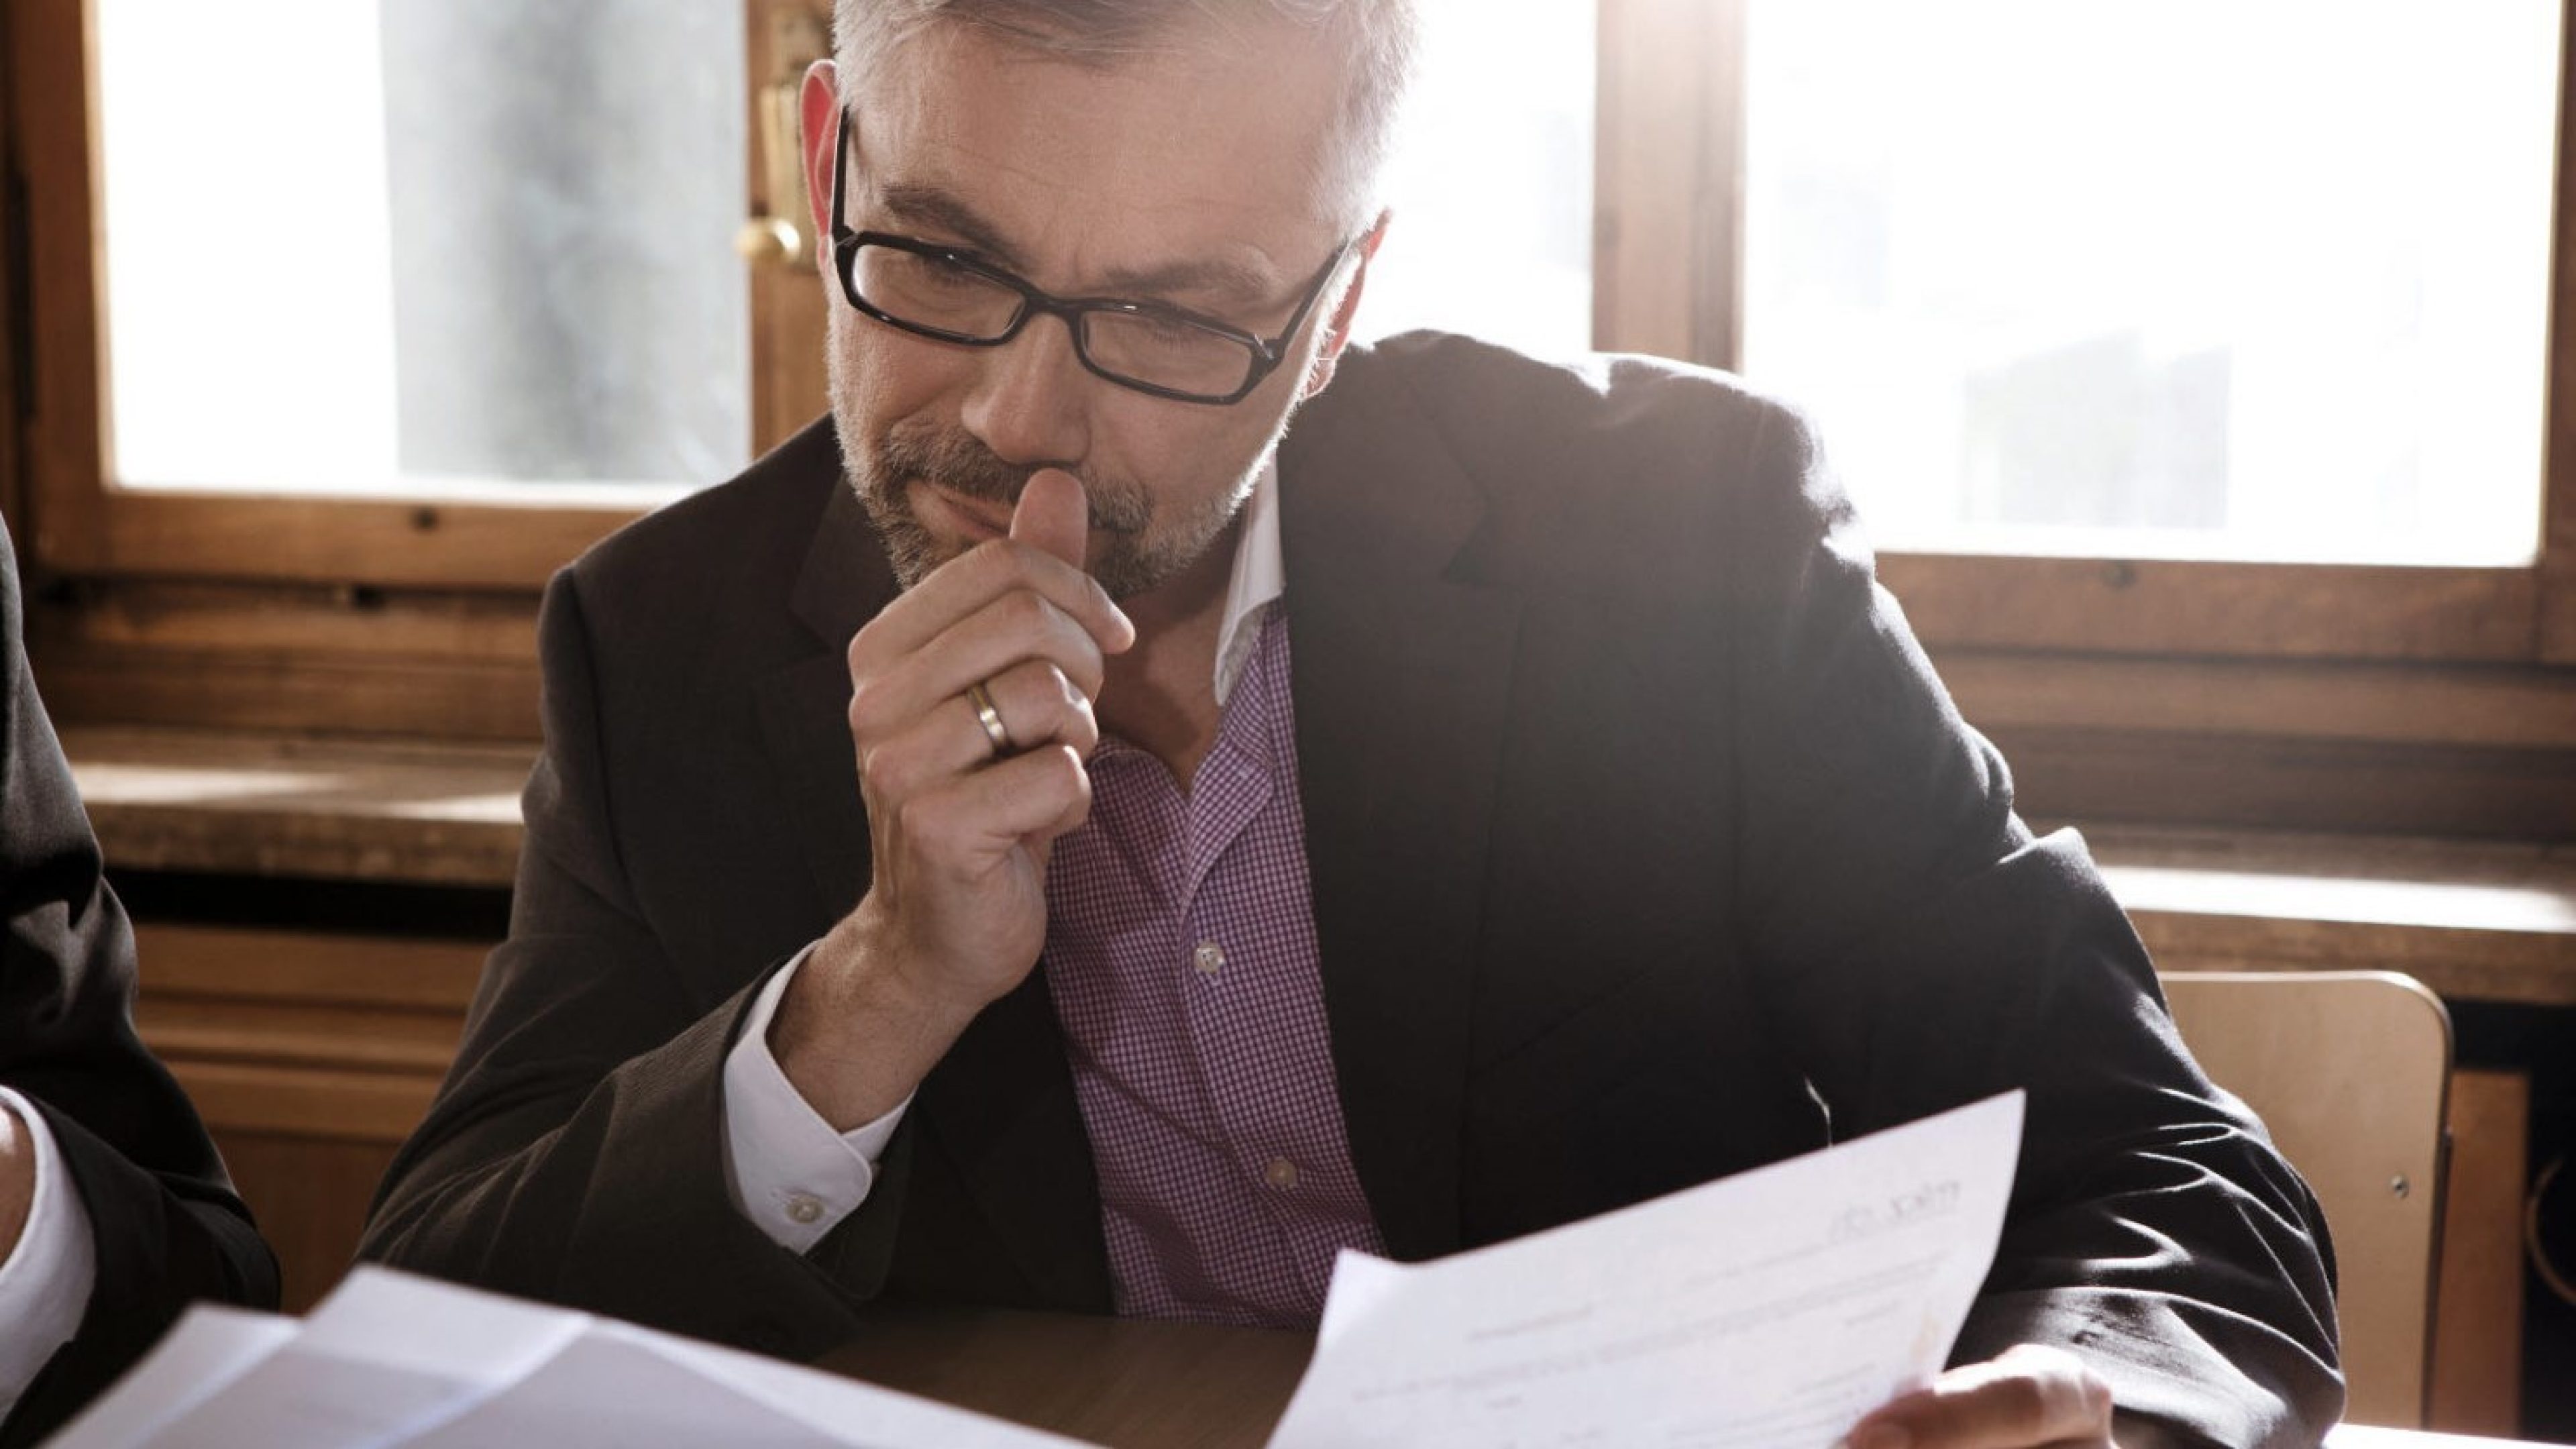 A man sits in the office comparing the options of buying or renting.